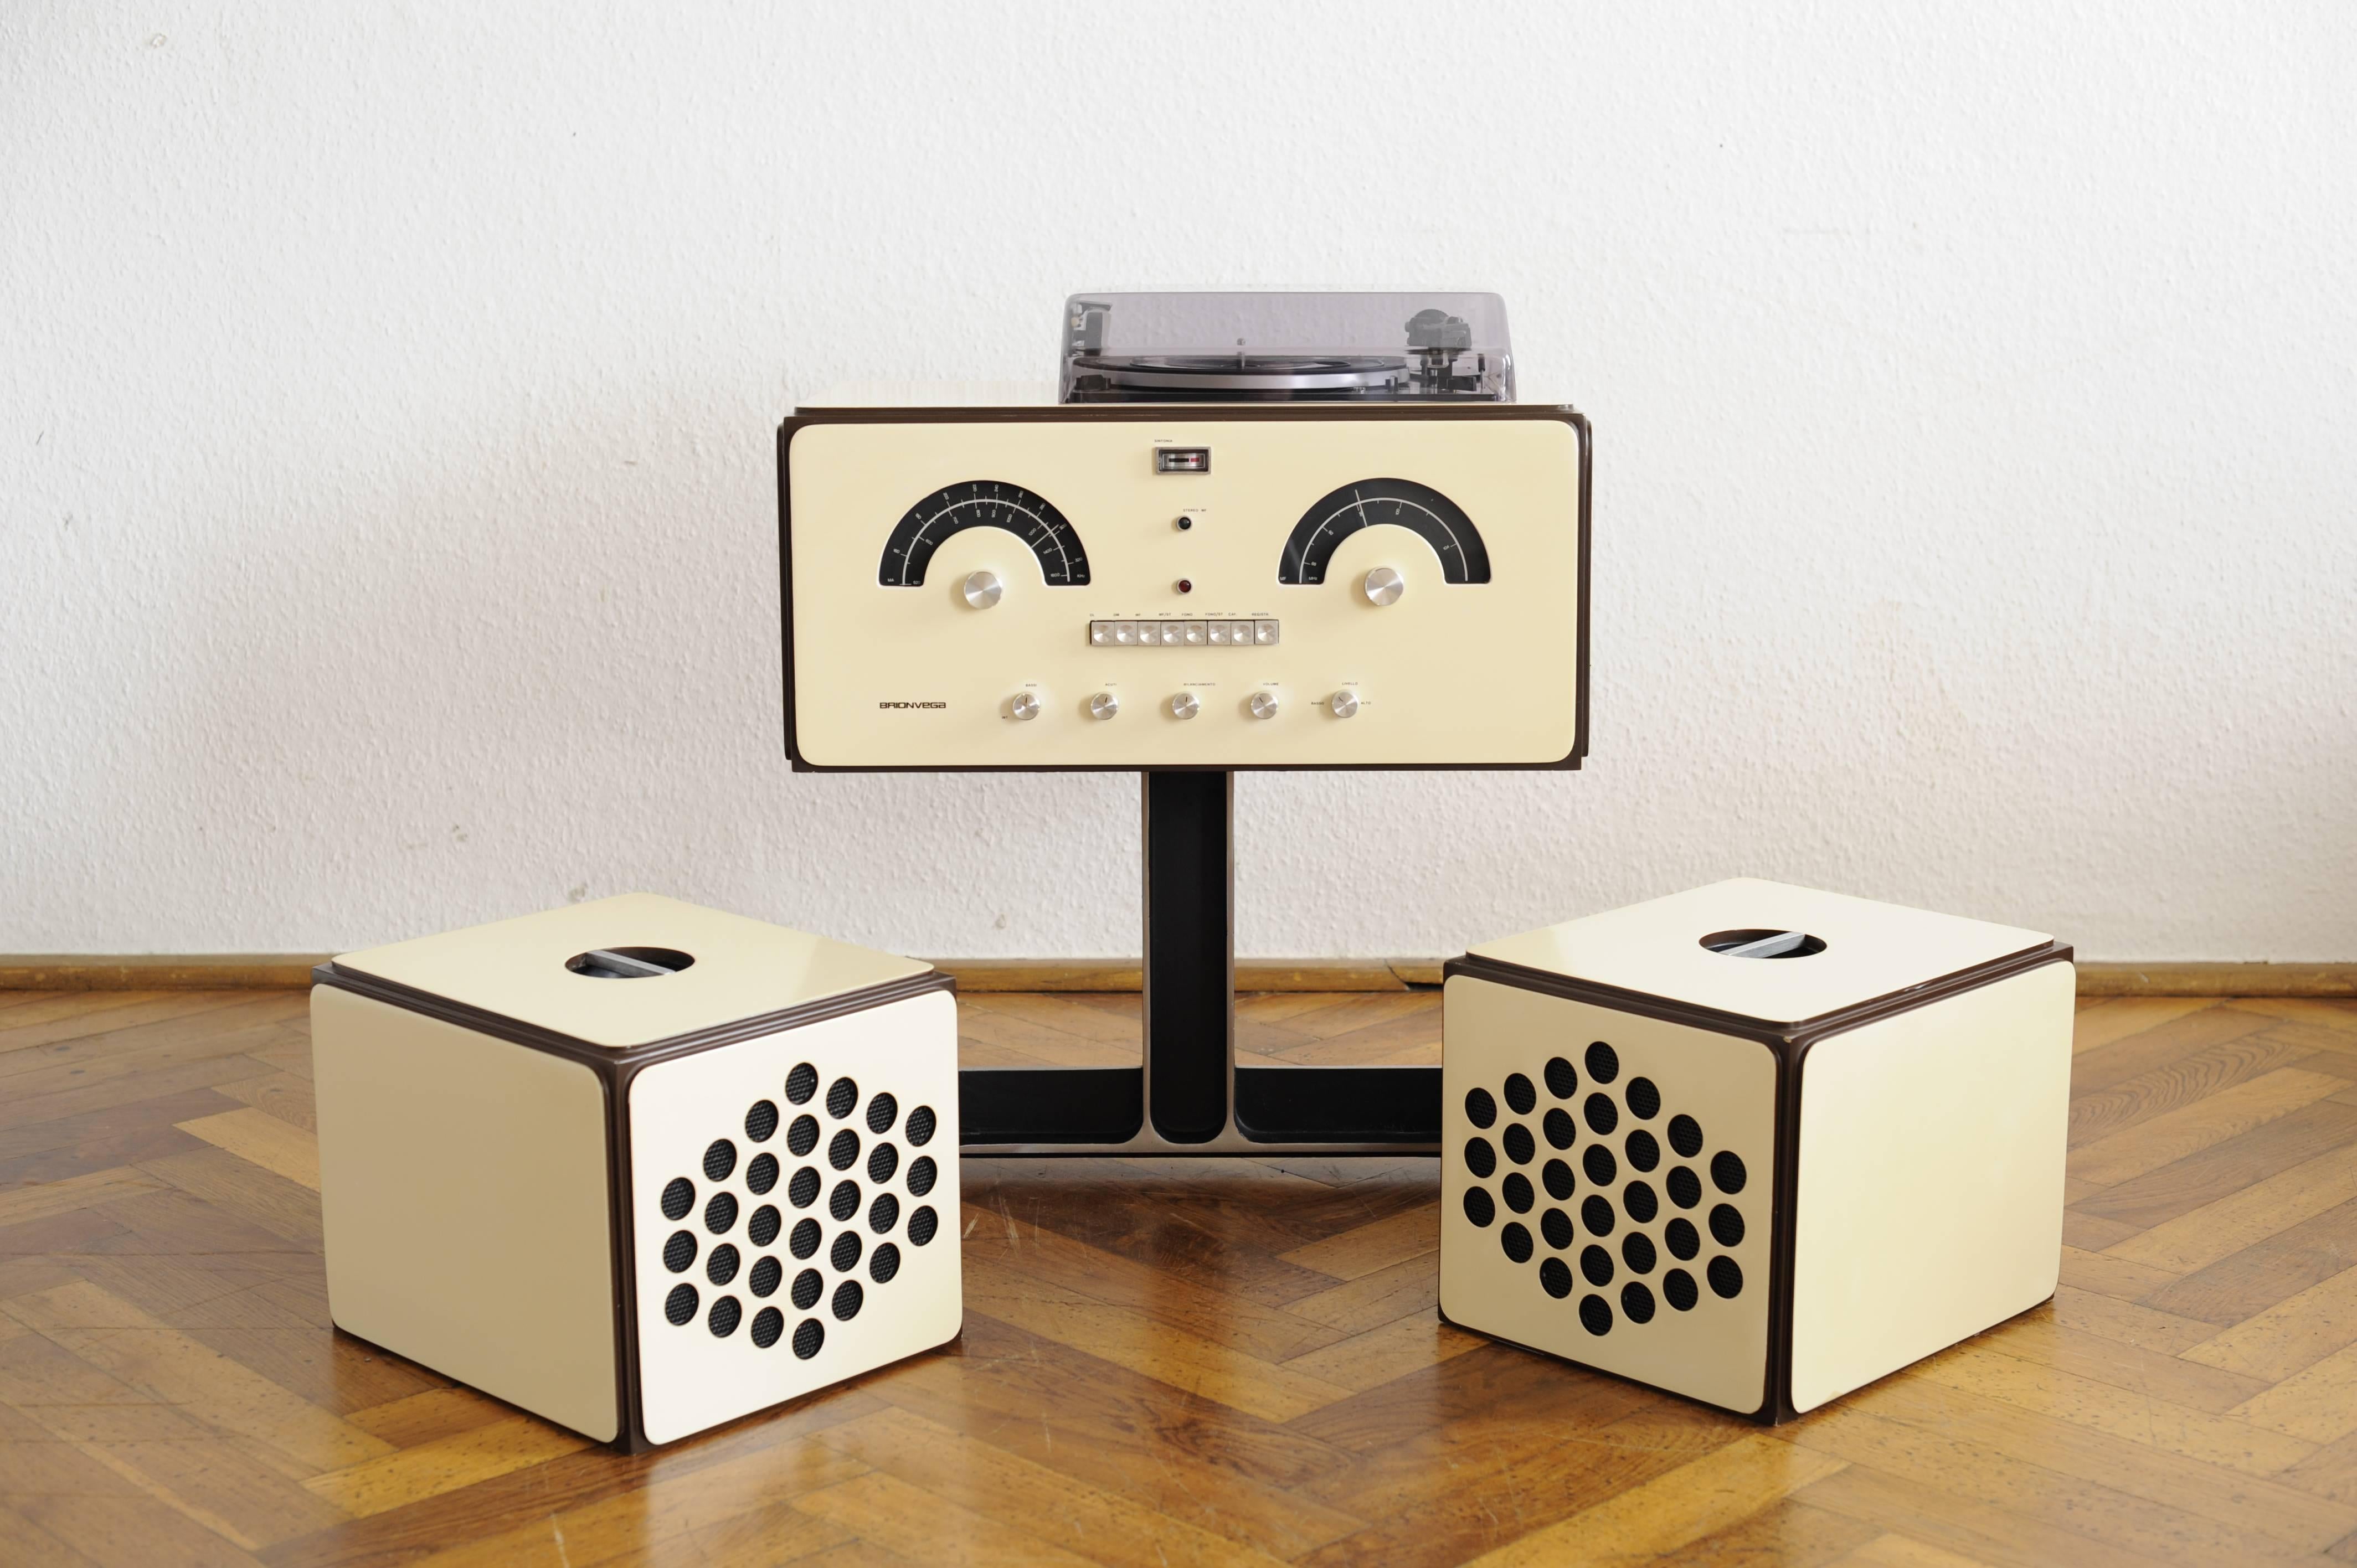 Mid-Century Modern Vintage White Brionvega RR 126 Record Player Sideboard Radio, 1965 David Bowie For Sale